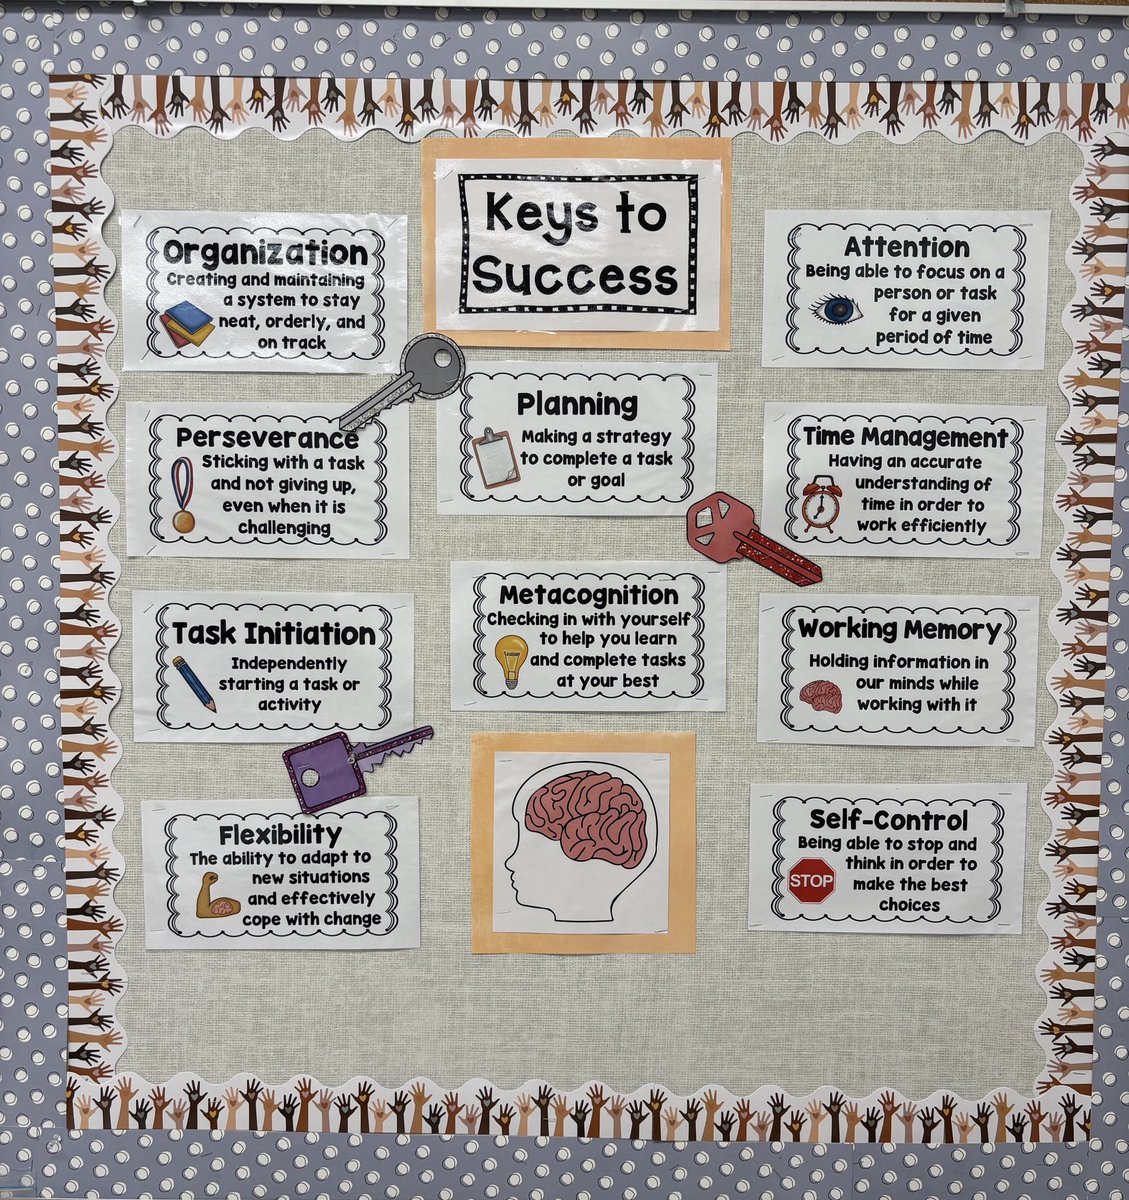 Mrs Fero has the Keys to Success posted for all to see #executivefunctioning